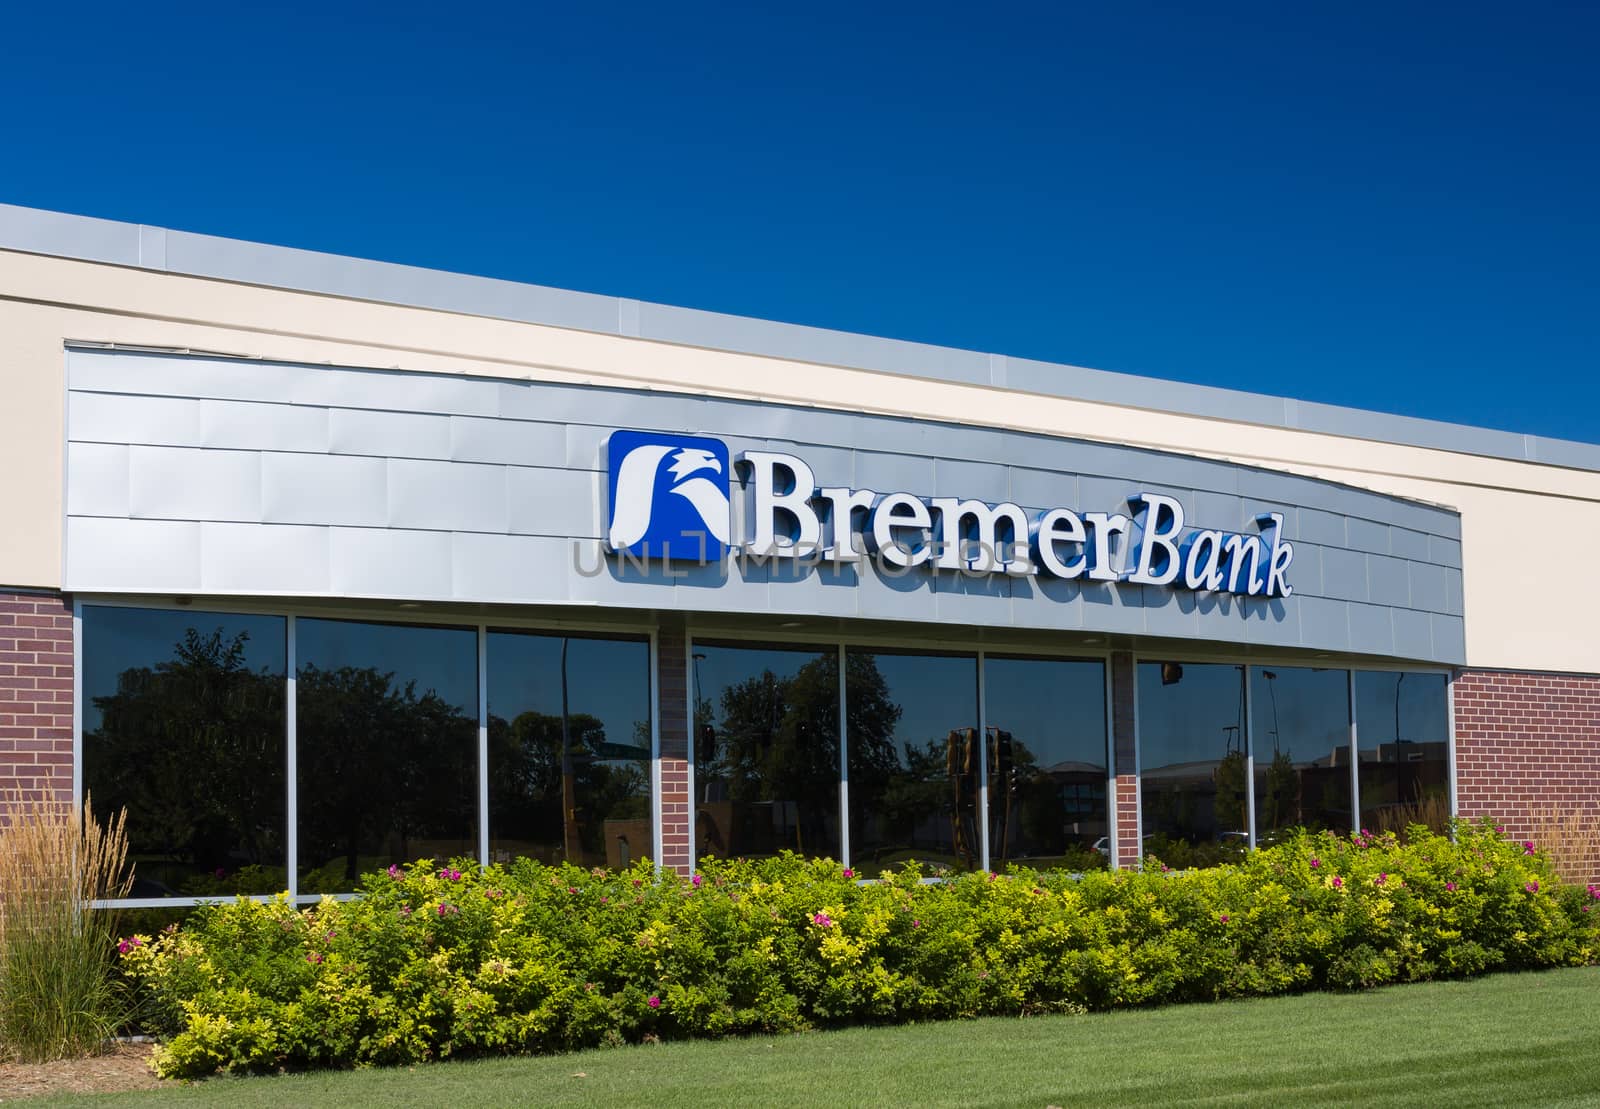 EDINA, MN/USA - AUGUST 11, 2015: Bremer Bank exterior. Bremer Bank is the name of the banks owned by the Bremer Financial Corporation.